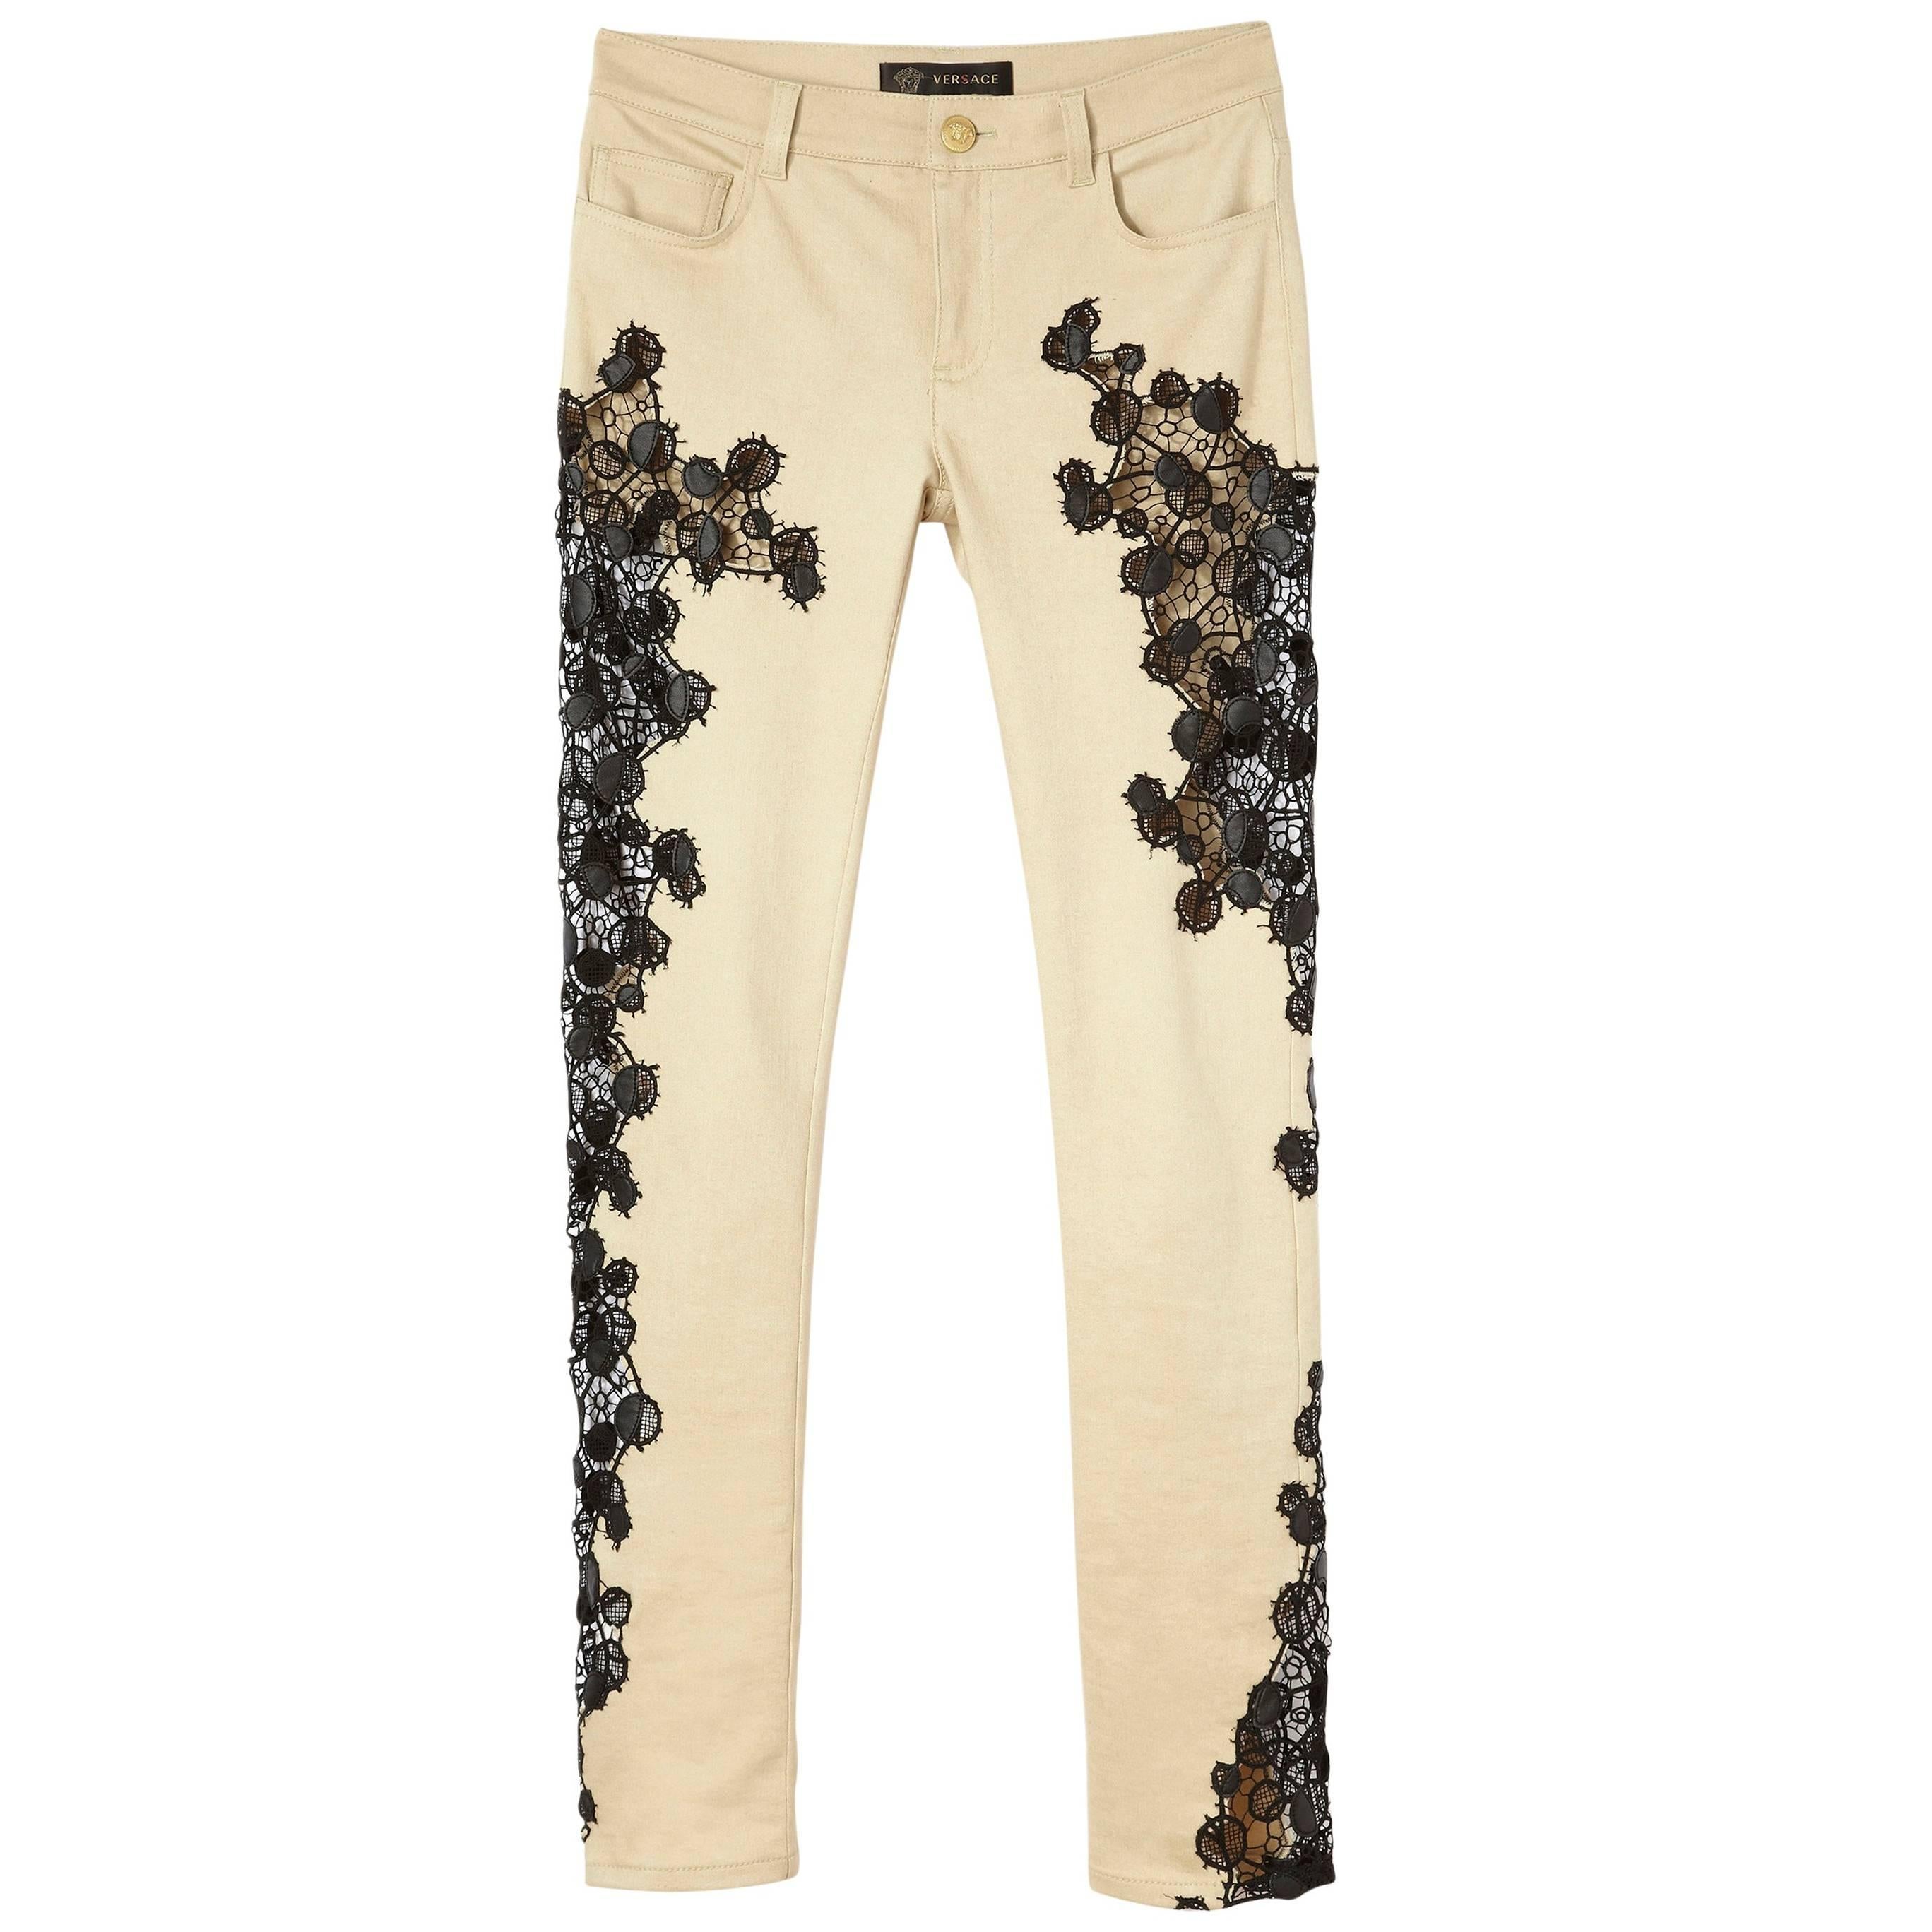 NEW VERSACE BAROCCO PRINTED JEANS for MEN size 32 For Sale at 